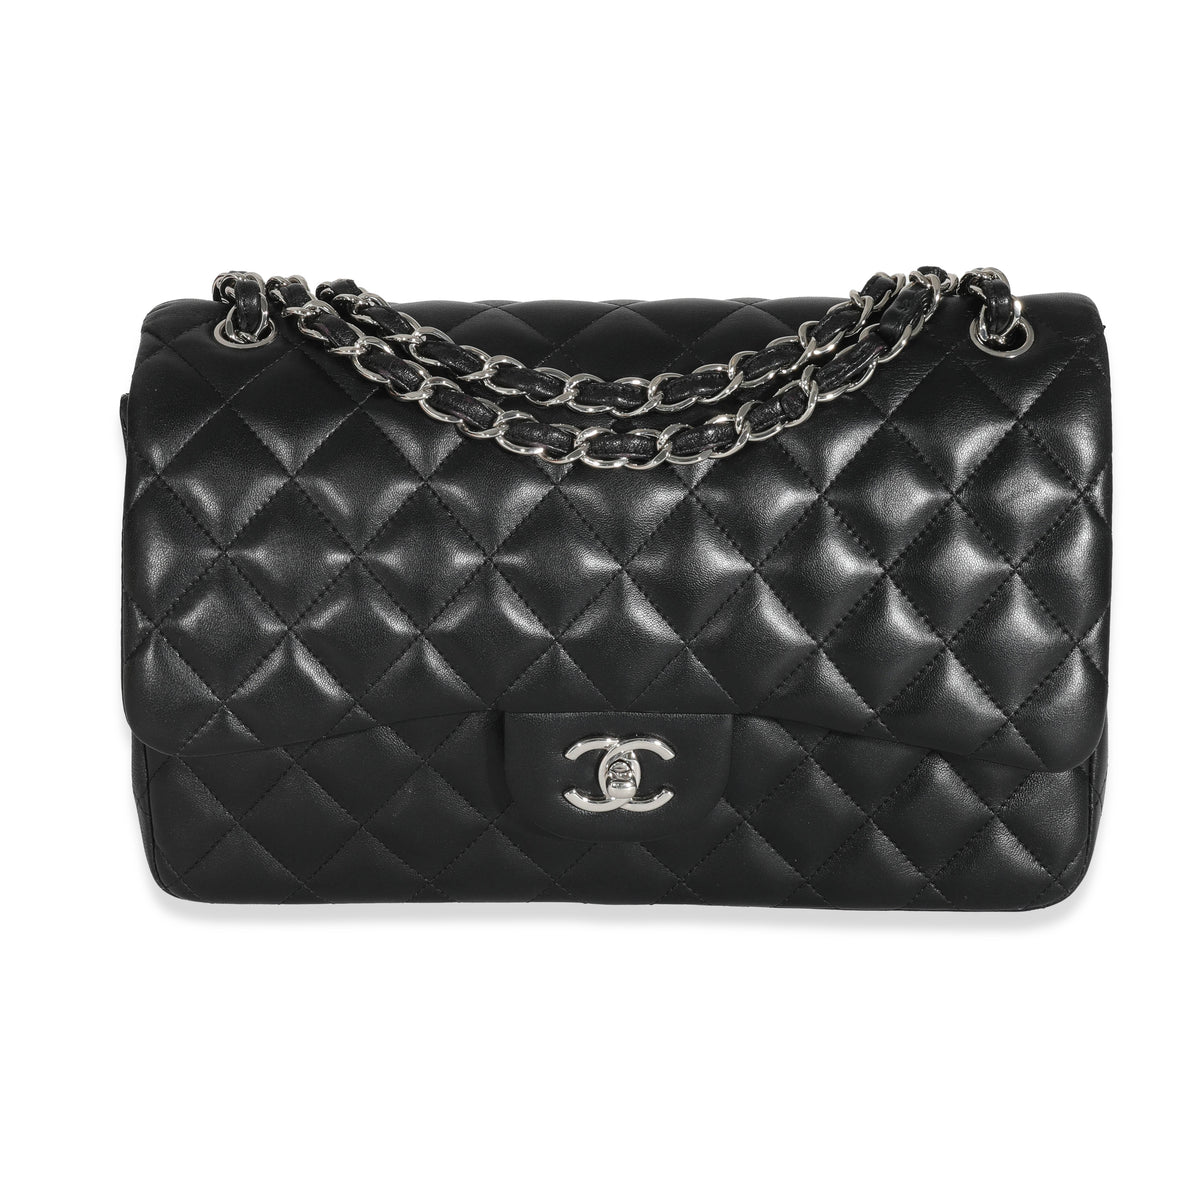 Chanel Black Quilted Lambskin Jumbo Classic Double Flap Bag, myGemma, SG